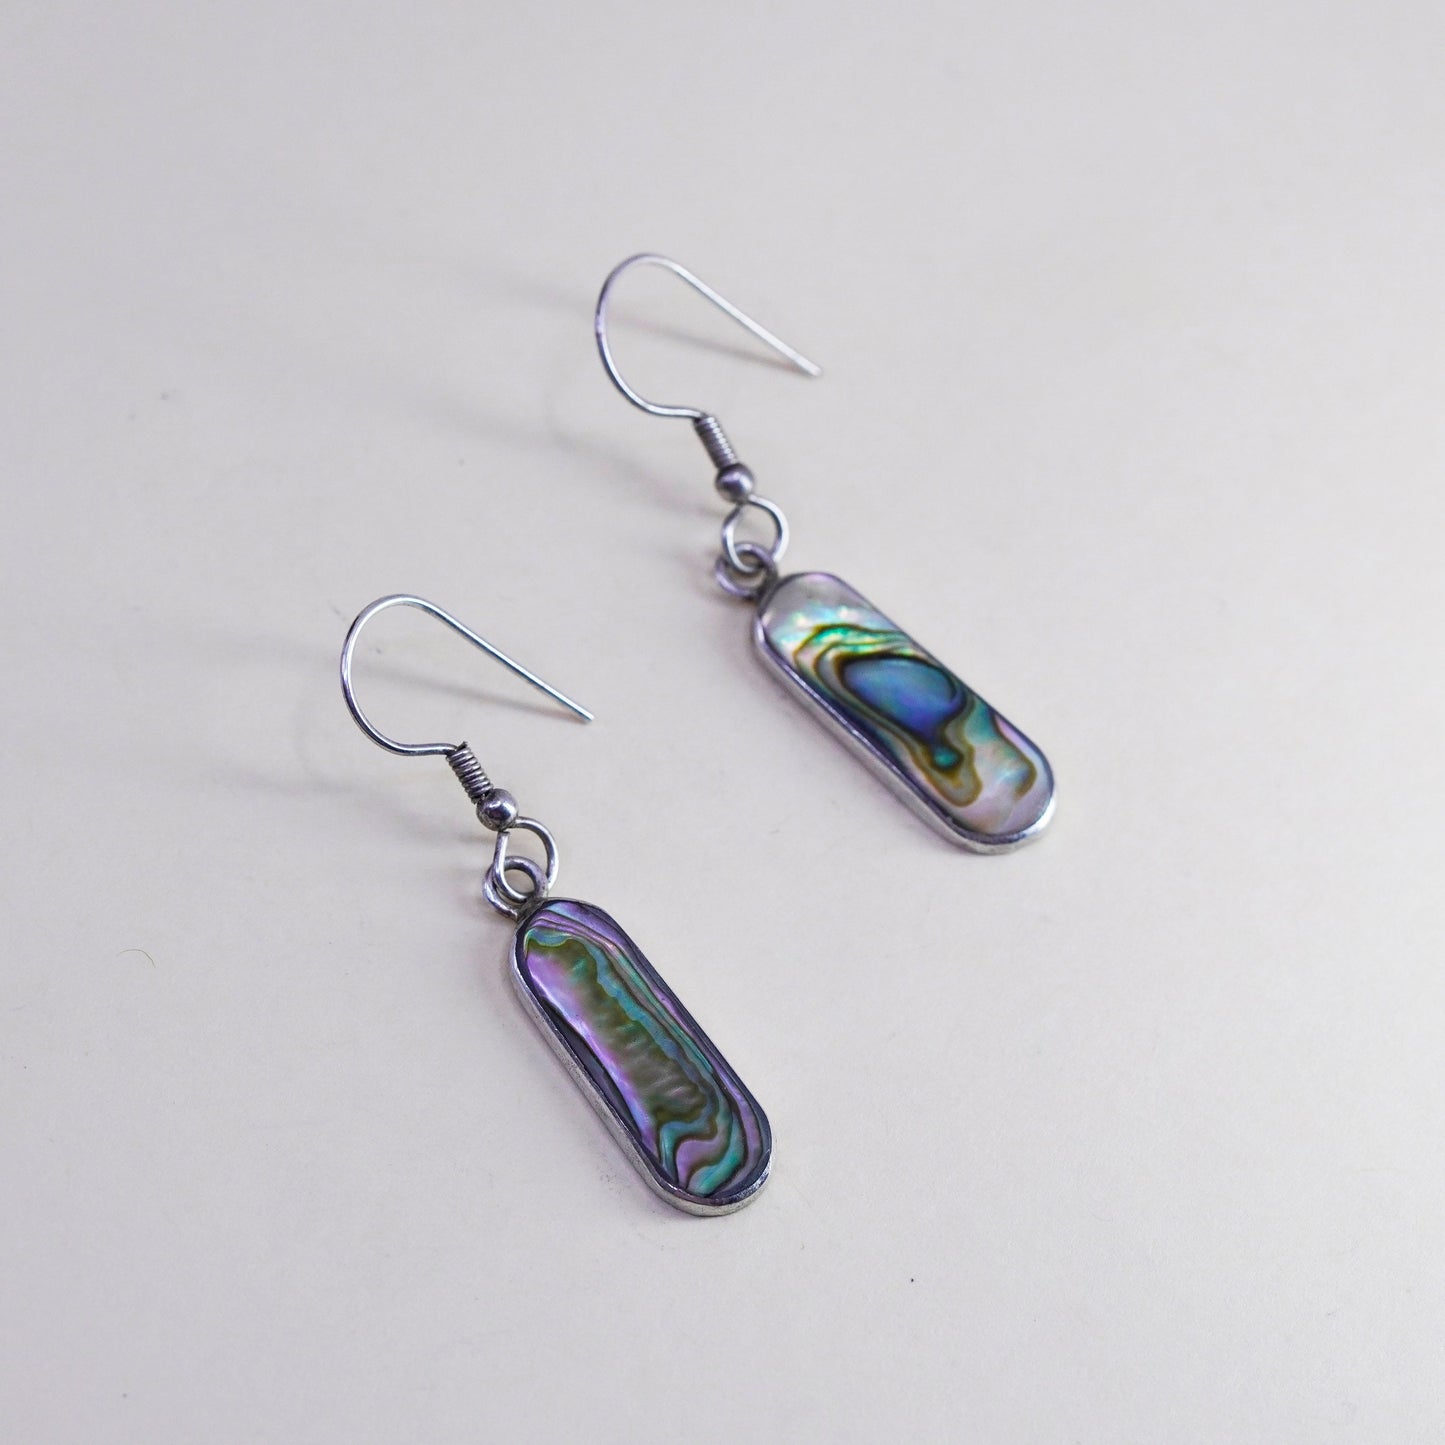 Vintage sterling silver handmade earrings, Mexico 925 rectangular with abalone